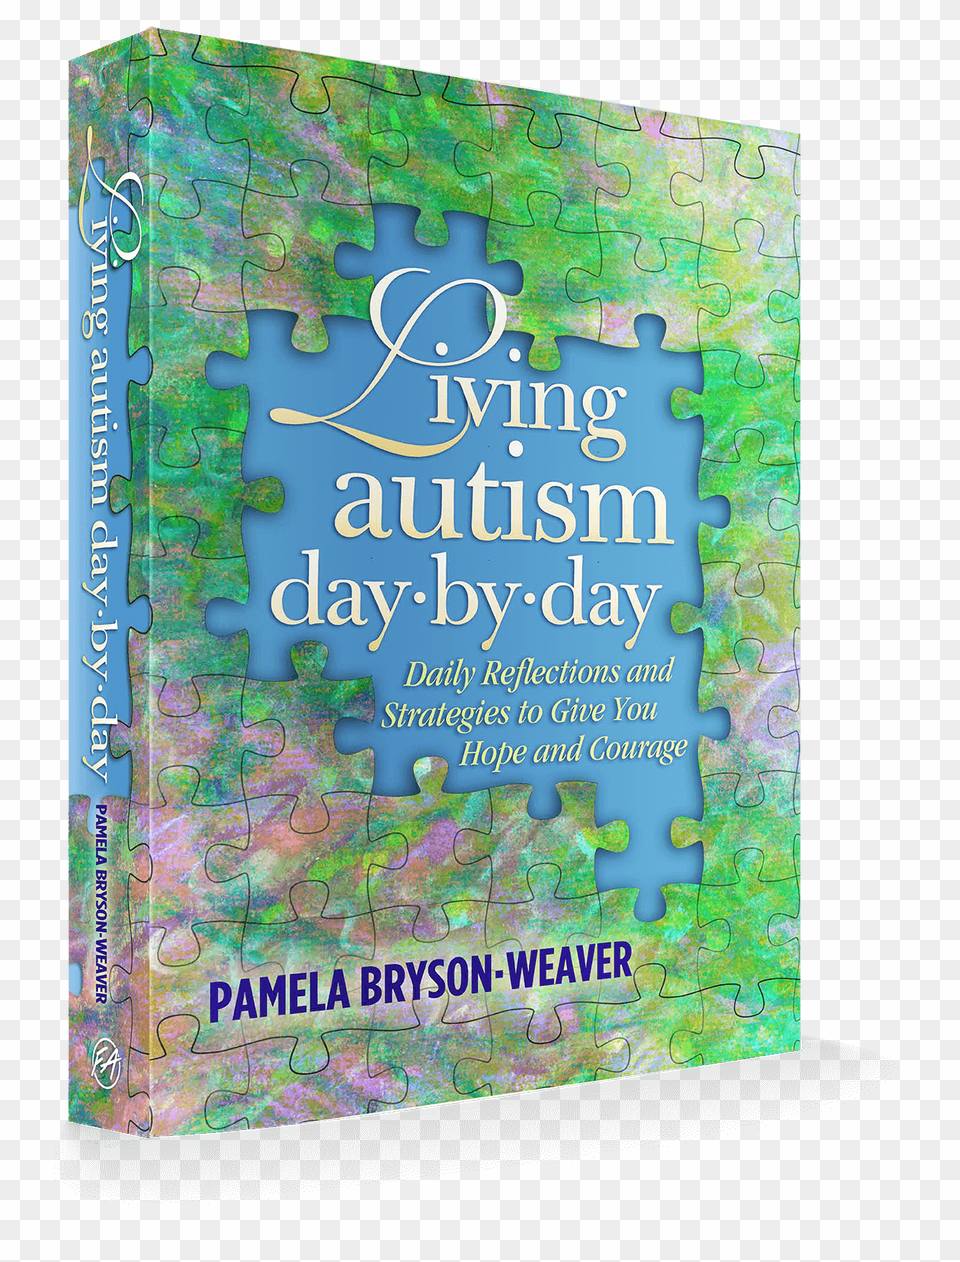 Find Trusted Autism Service Providers Expert Advise Living Autism Daybyday Daily Reflections And Strategies, Book, Publication, Game, Jigsaw Puzzle Free Png